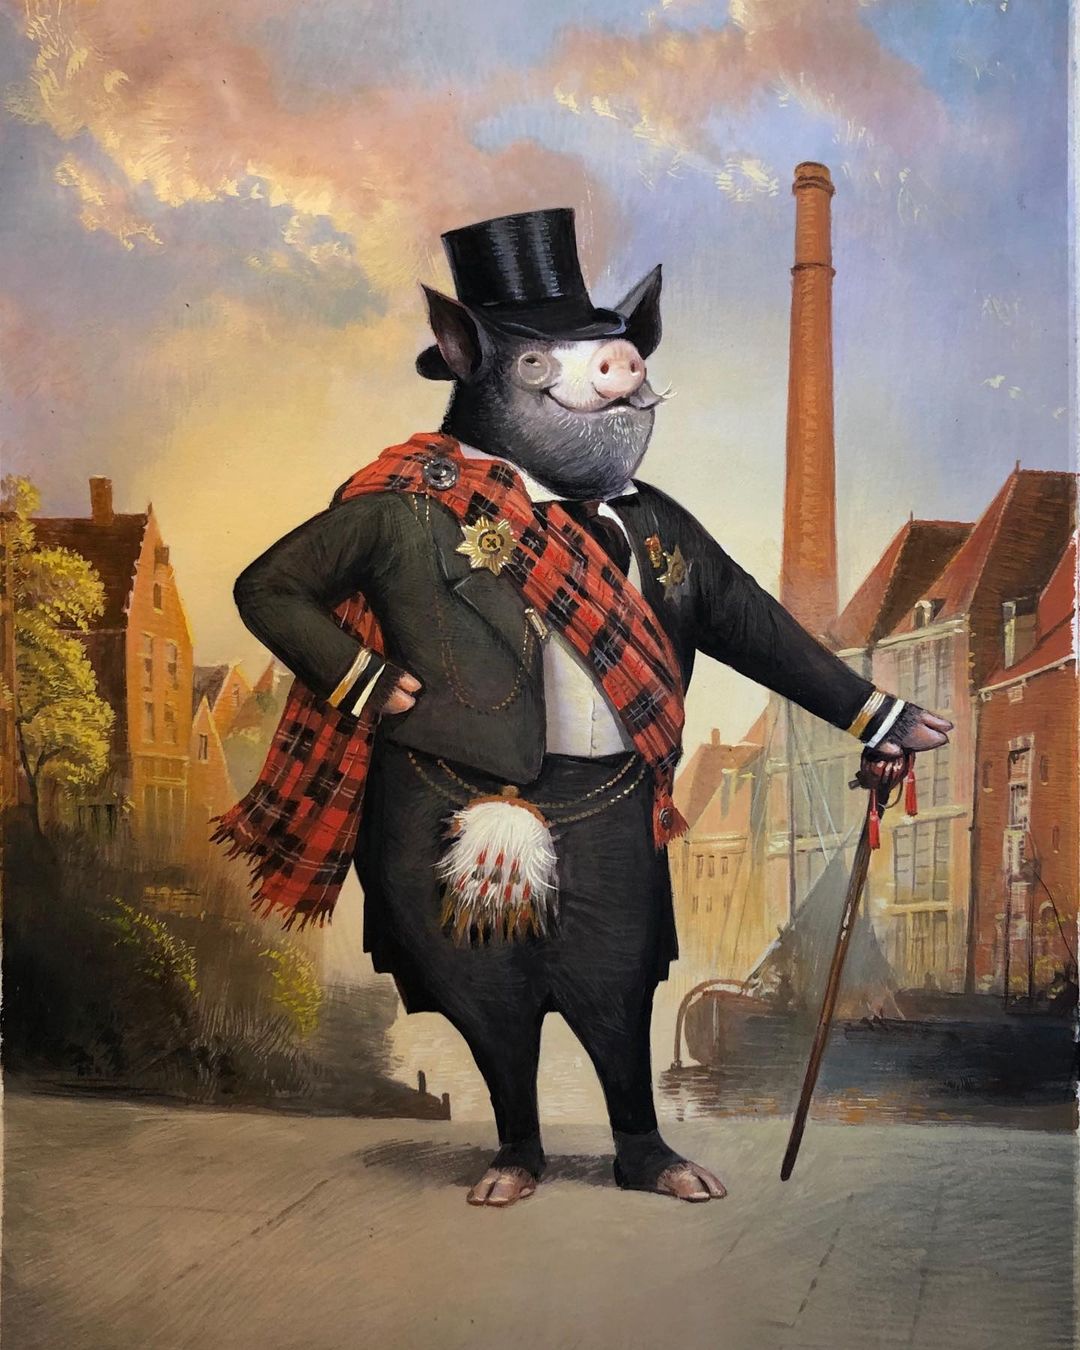 Humorous Anthropomorphized Animal Portraits In The Classical Style By Bill Mayer (21)